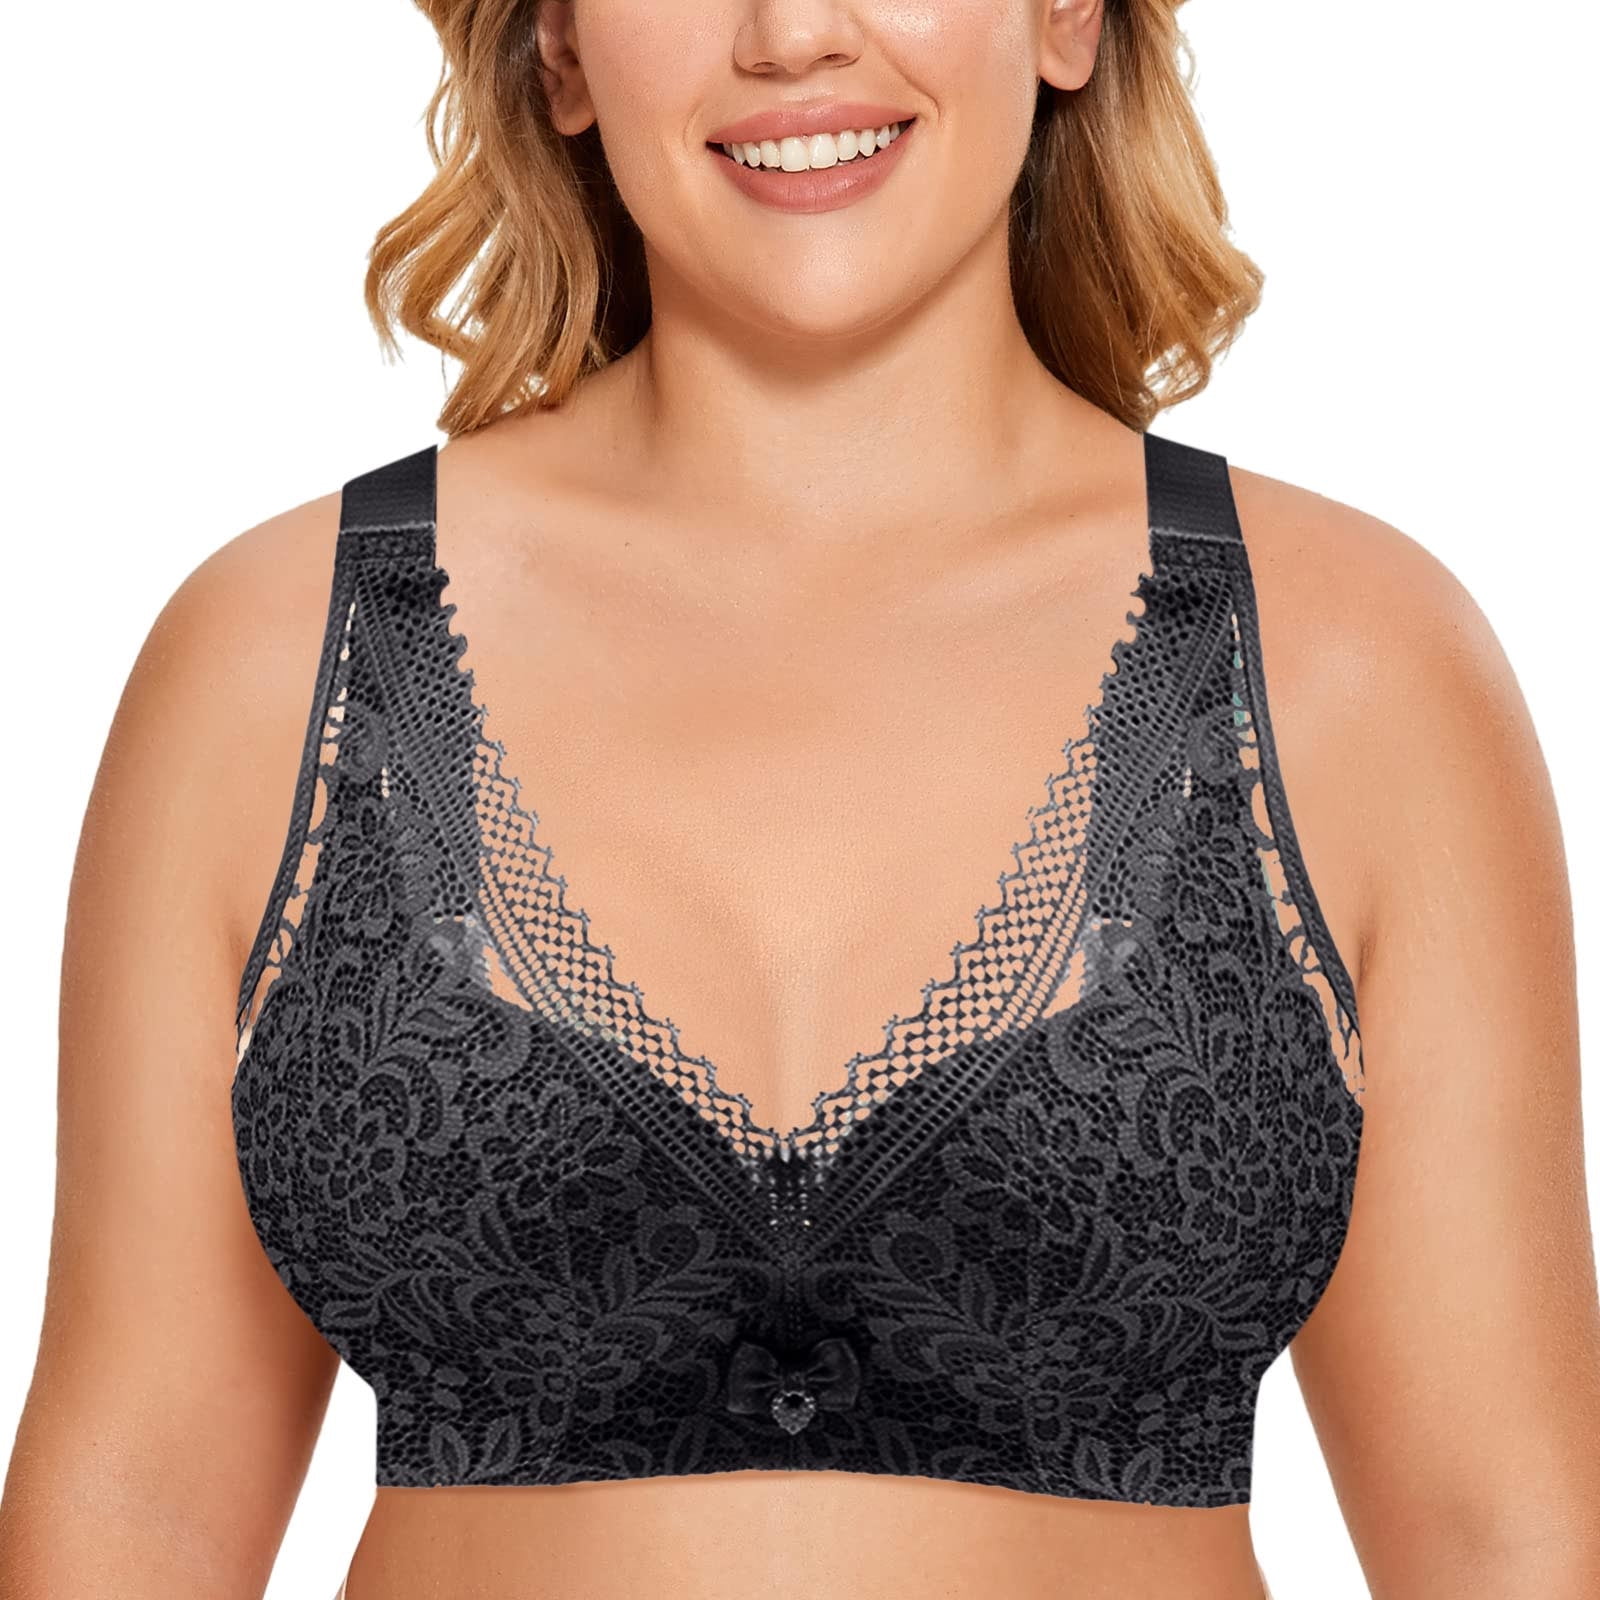  Womens Full Coverage Underwired Floral Lace Bra